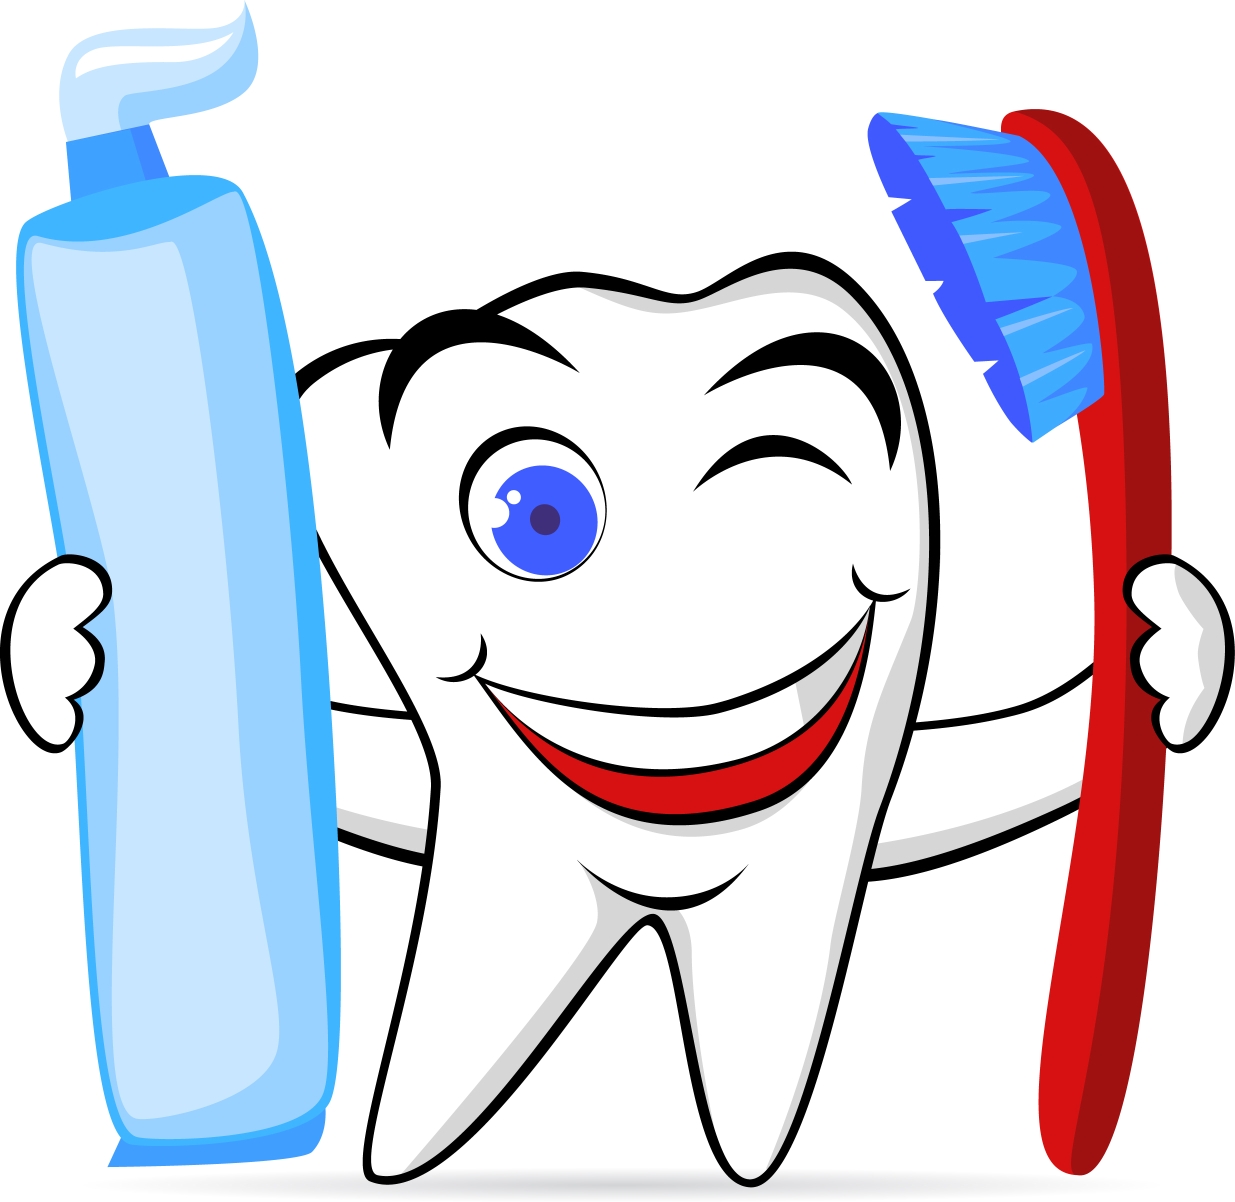 Tooth cartoon images clipart image #11809